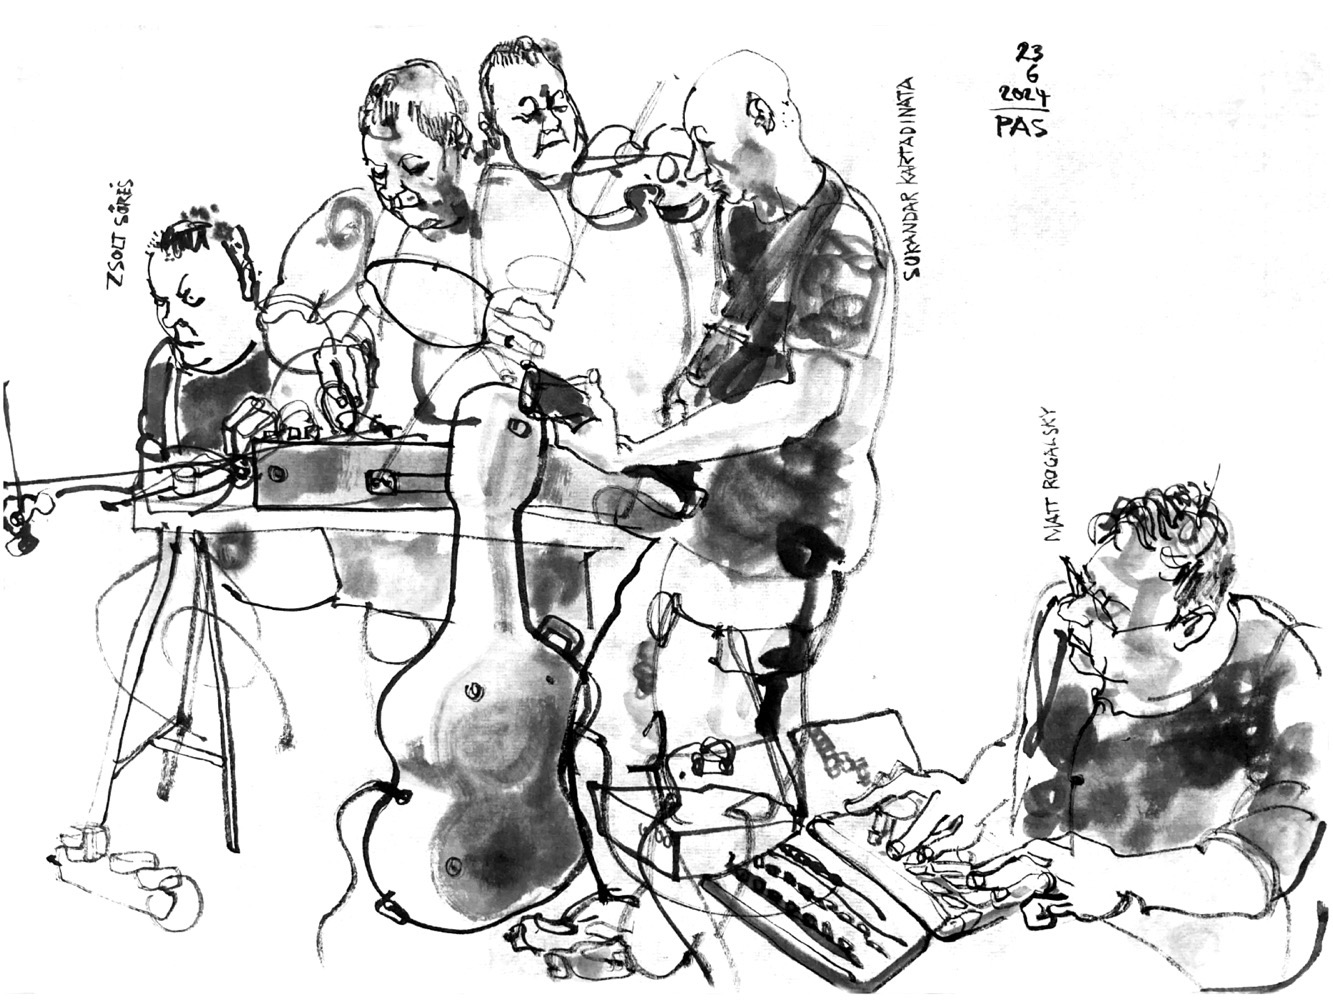 Ink drawing of three musicians, the violonist depicted three times.